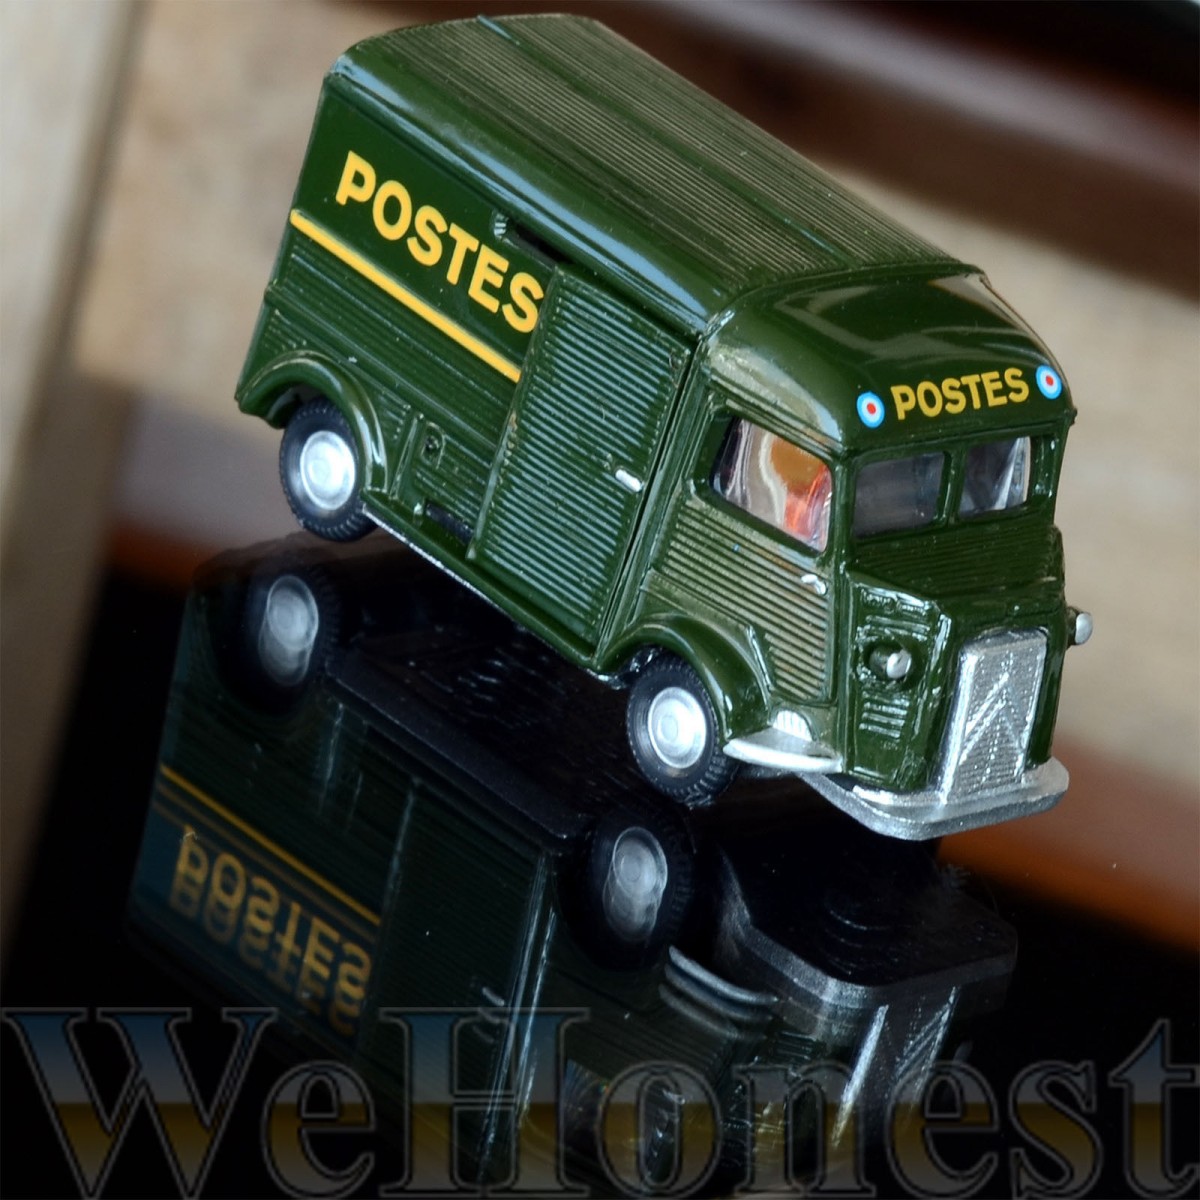 1 x Model POSTES Cars 1:87 HO Scale for Building Railroad Train Scenery